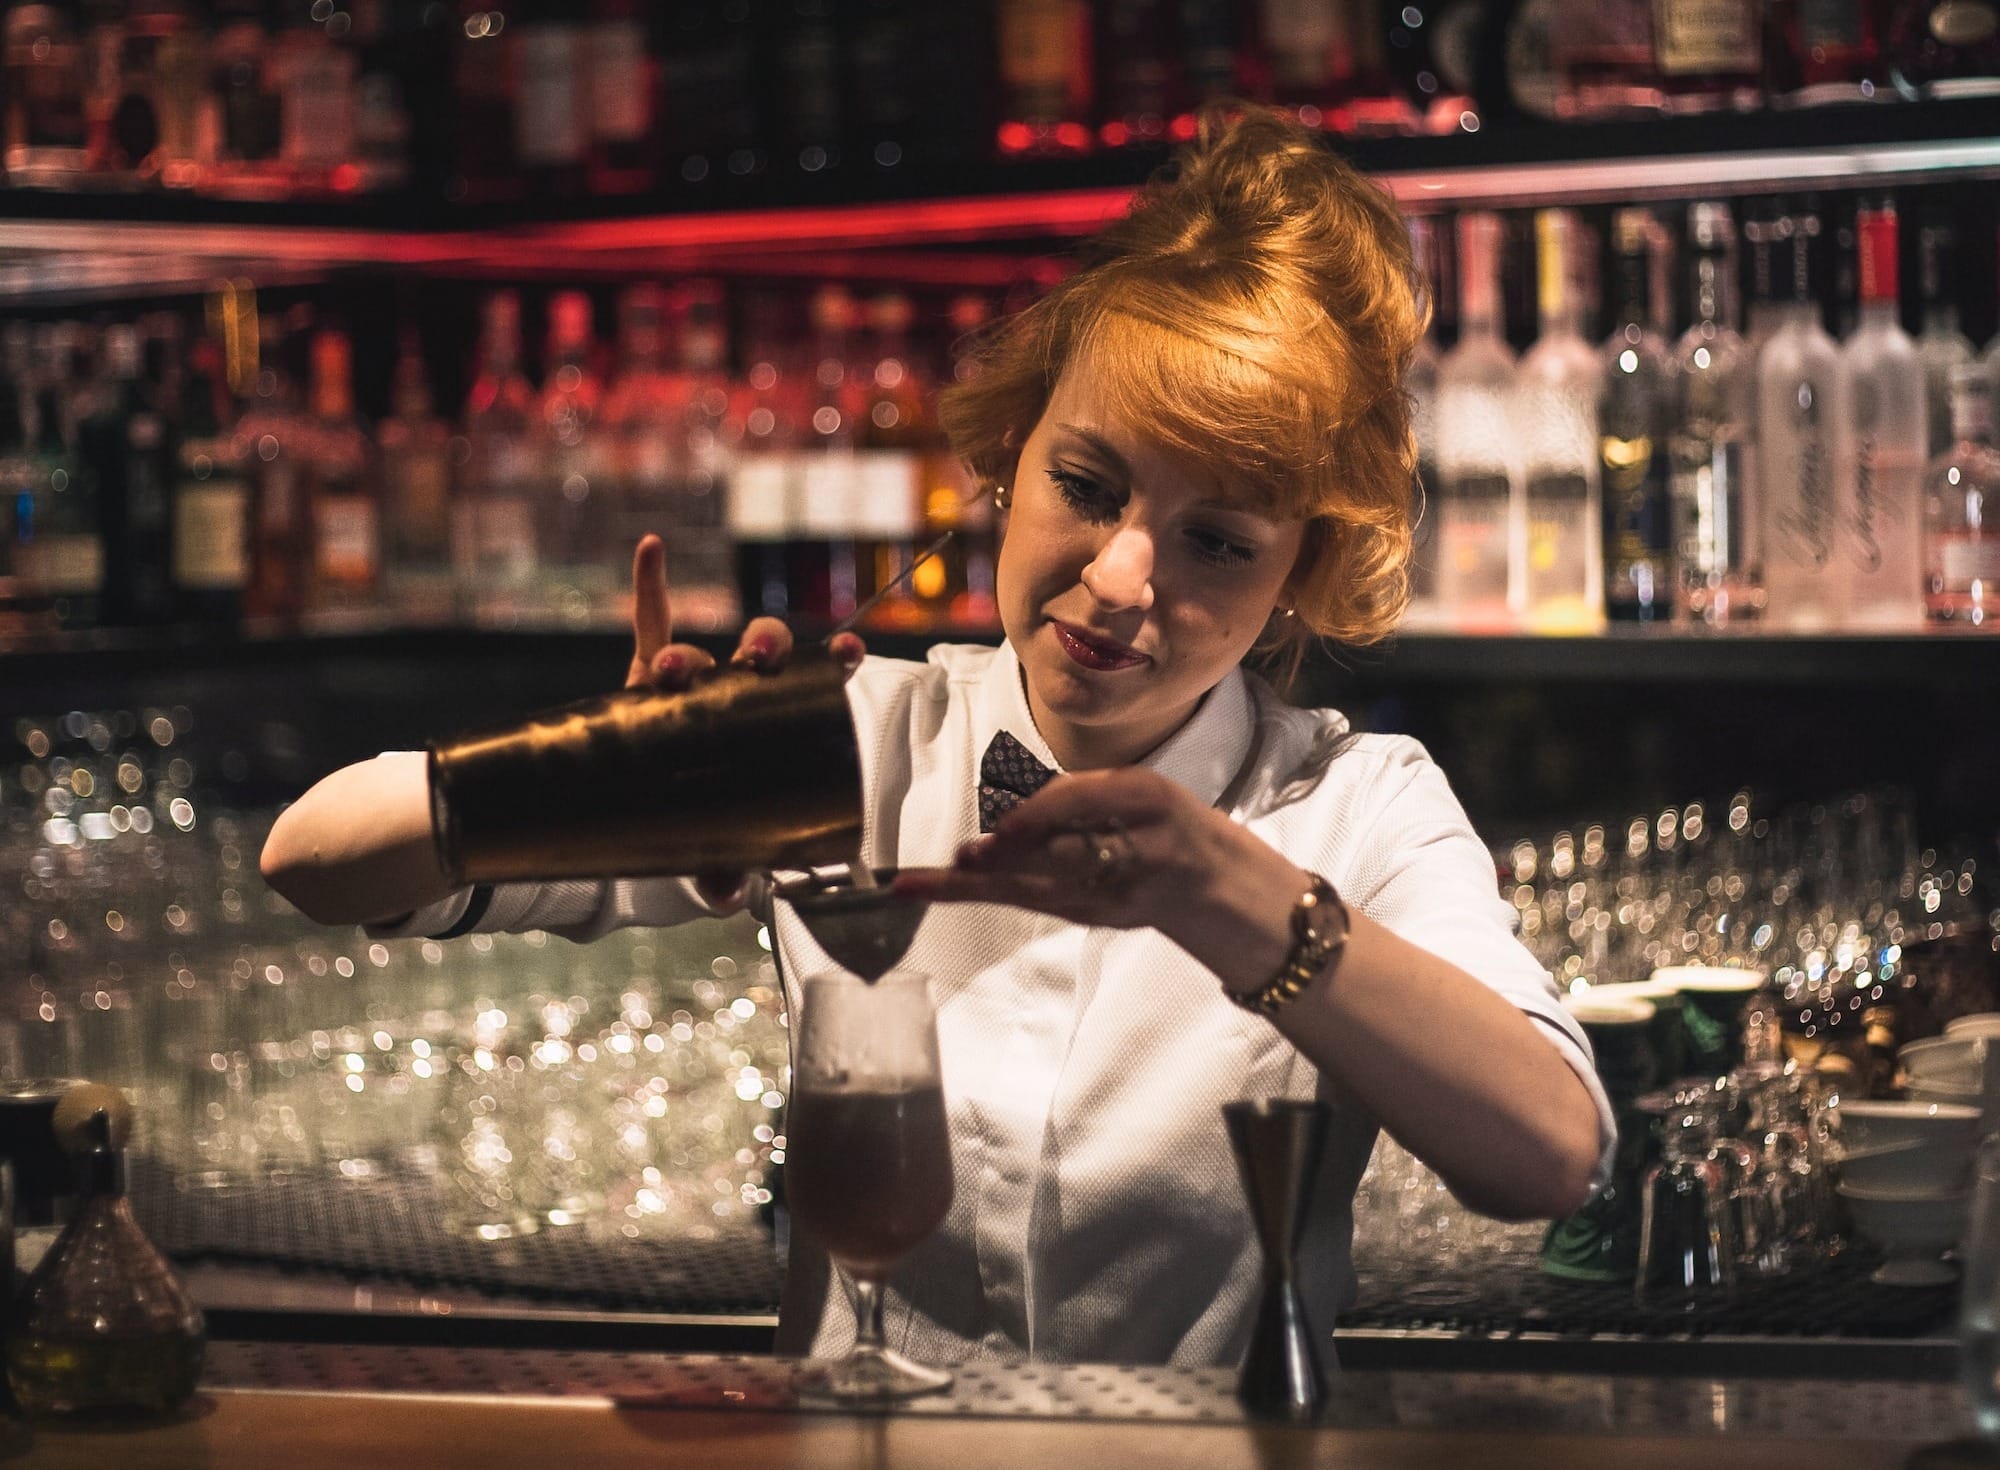 woman pouring bar shaker in clear glass stem glass on bar counter